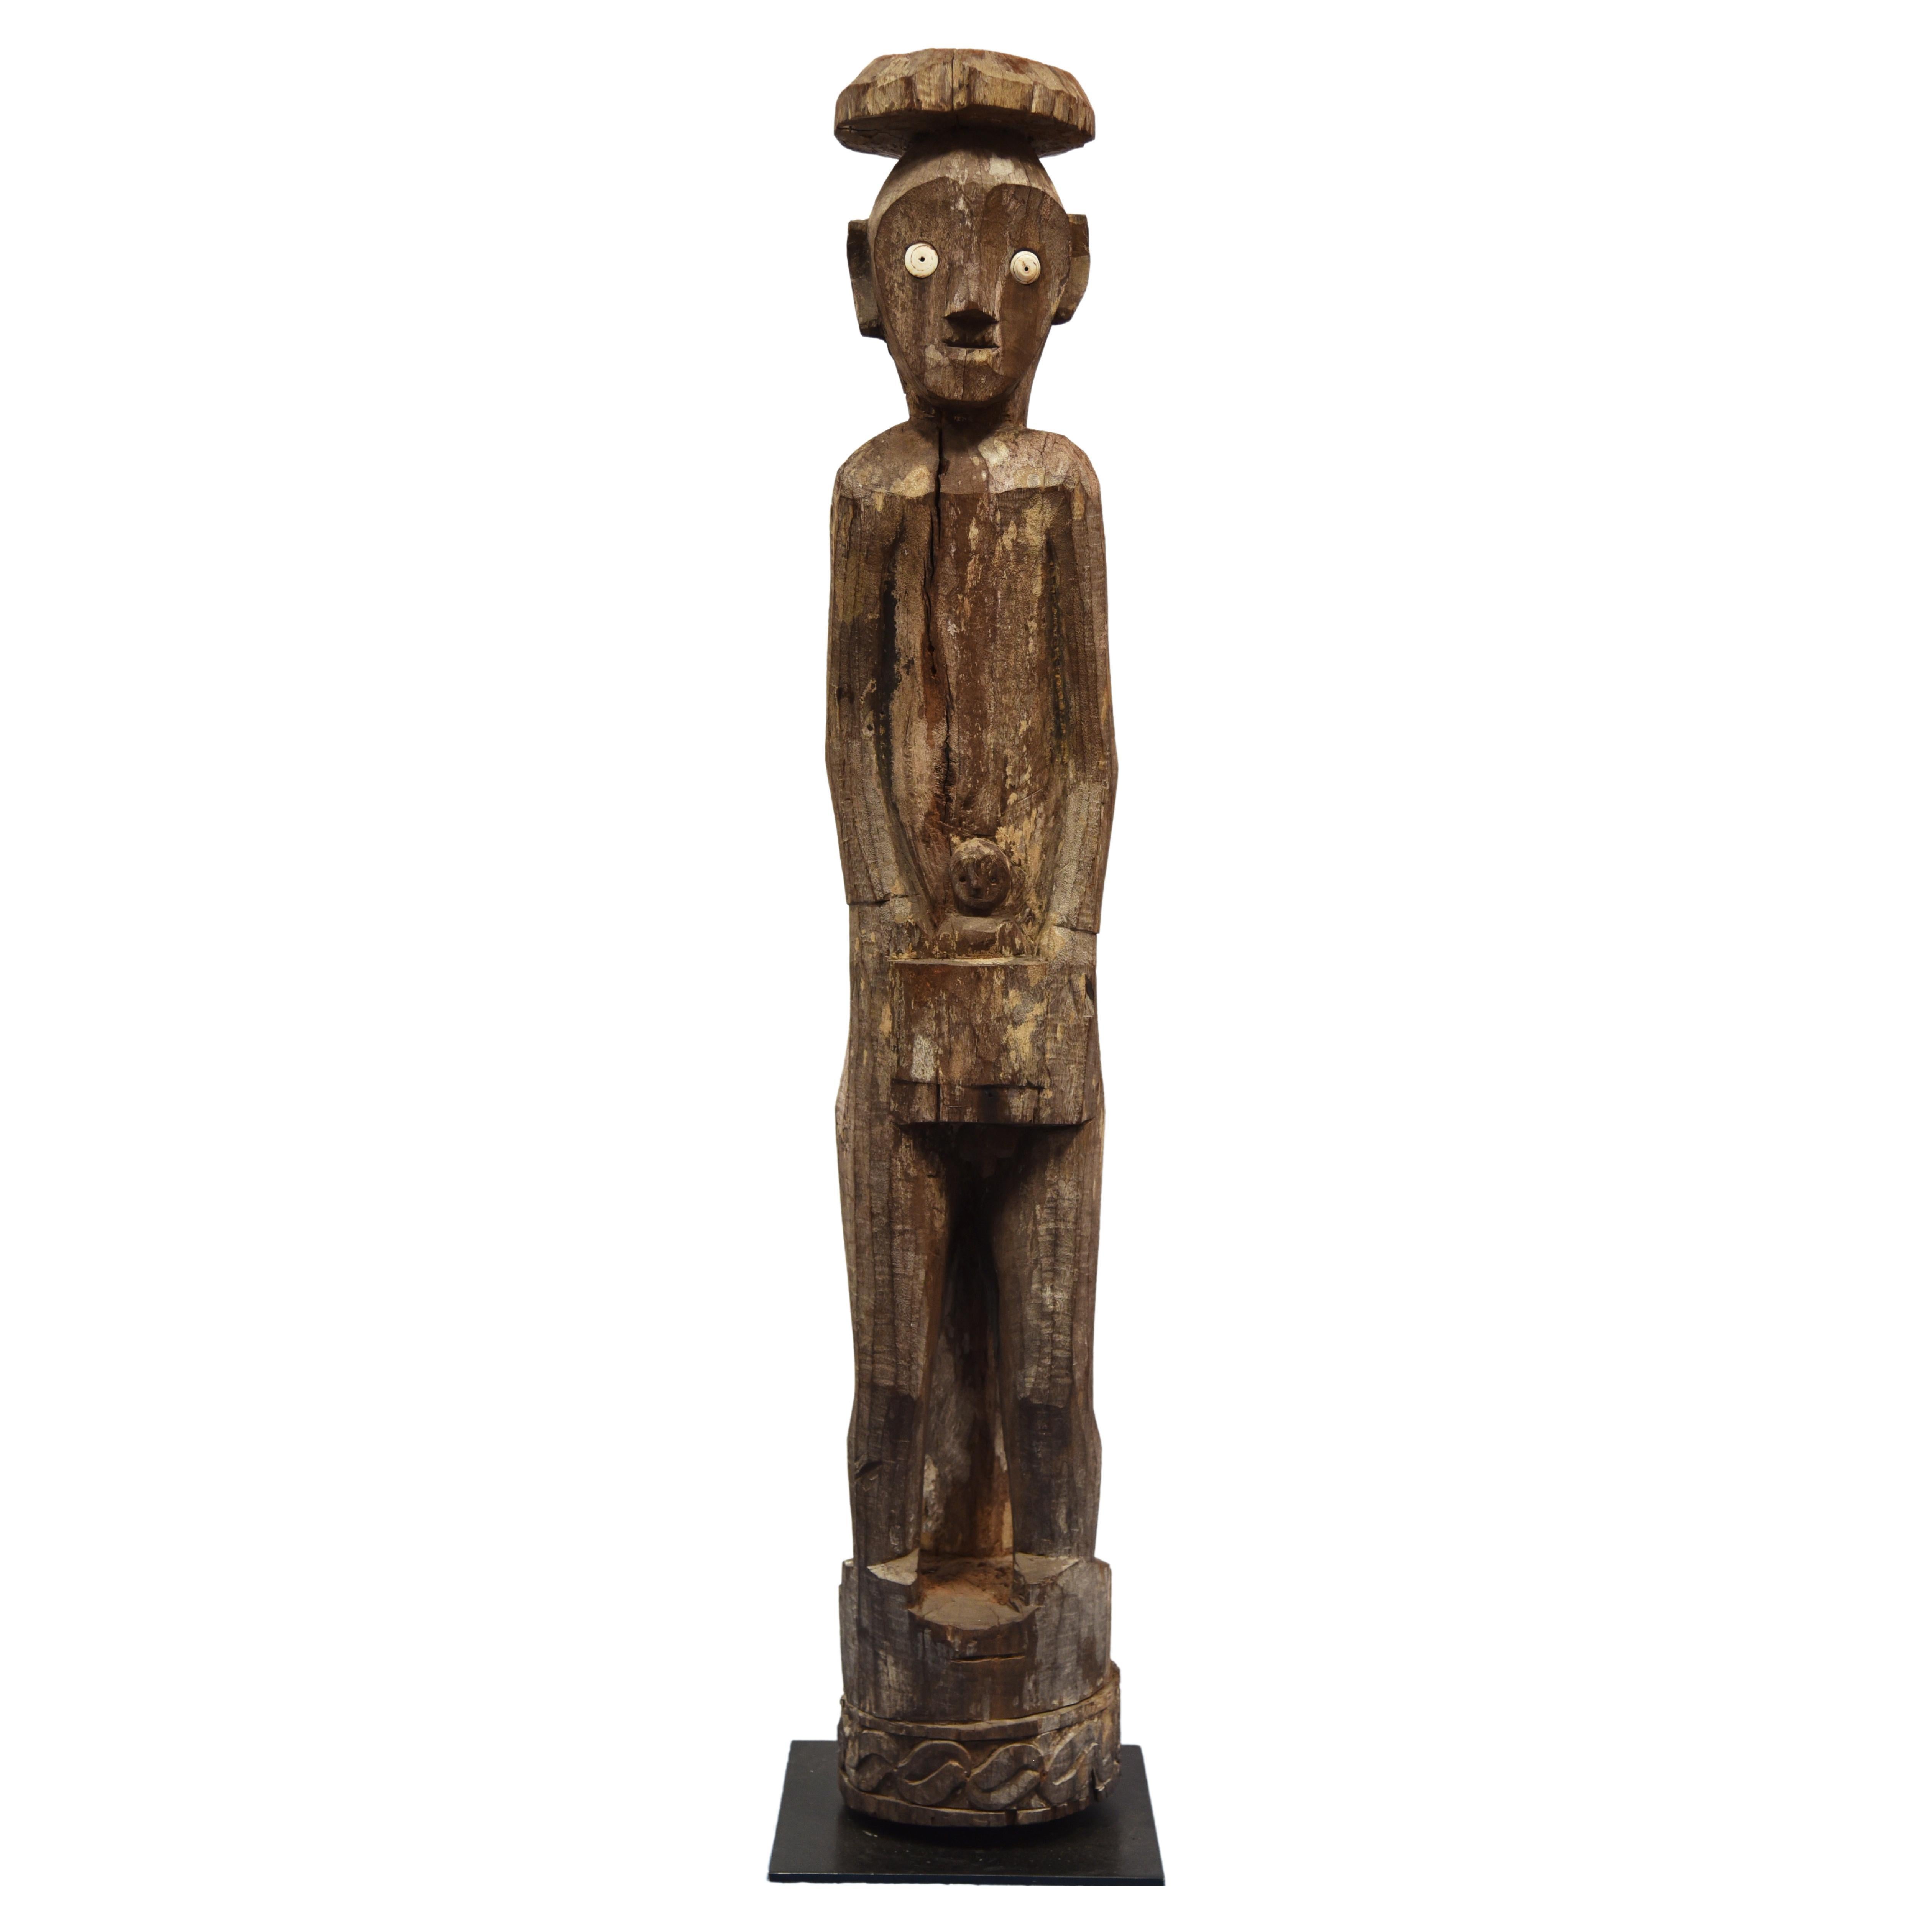 Carved wood figure of MAILE white child with a reptile wrapped around the back of the standing hand-carved wooden figure sculpture. Hampatong carved in Borneo, Indonesia by the Ban Dayak people of the interior rain forest. Hardwood and shell carved